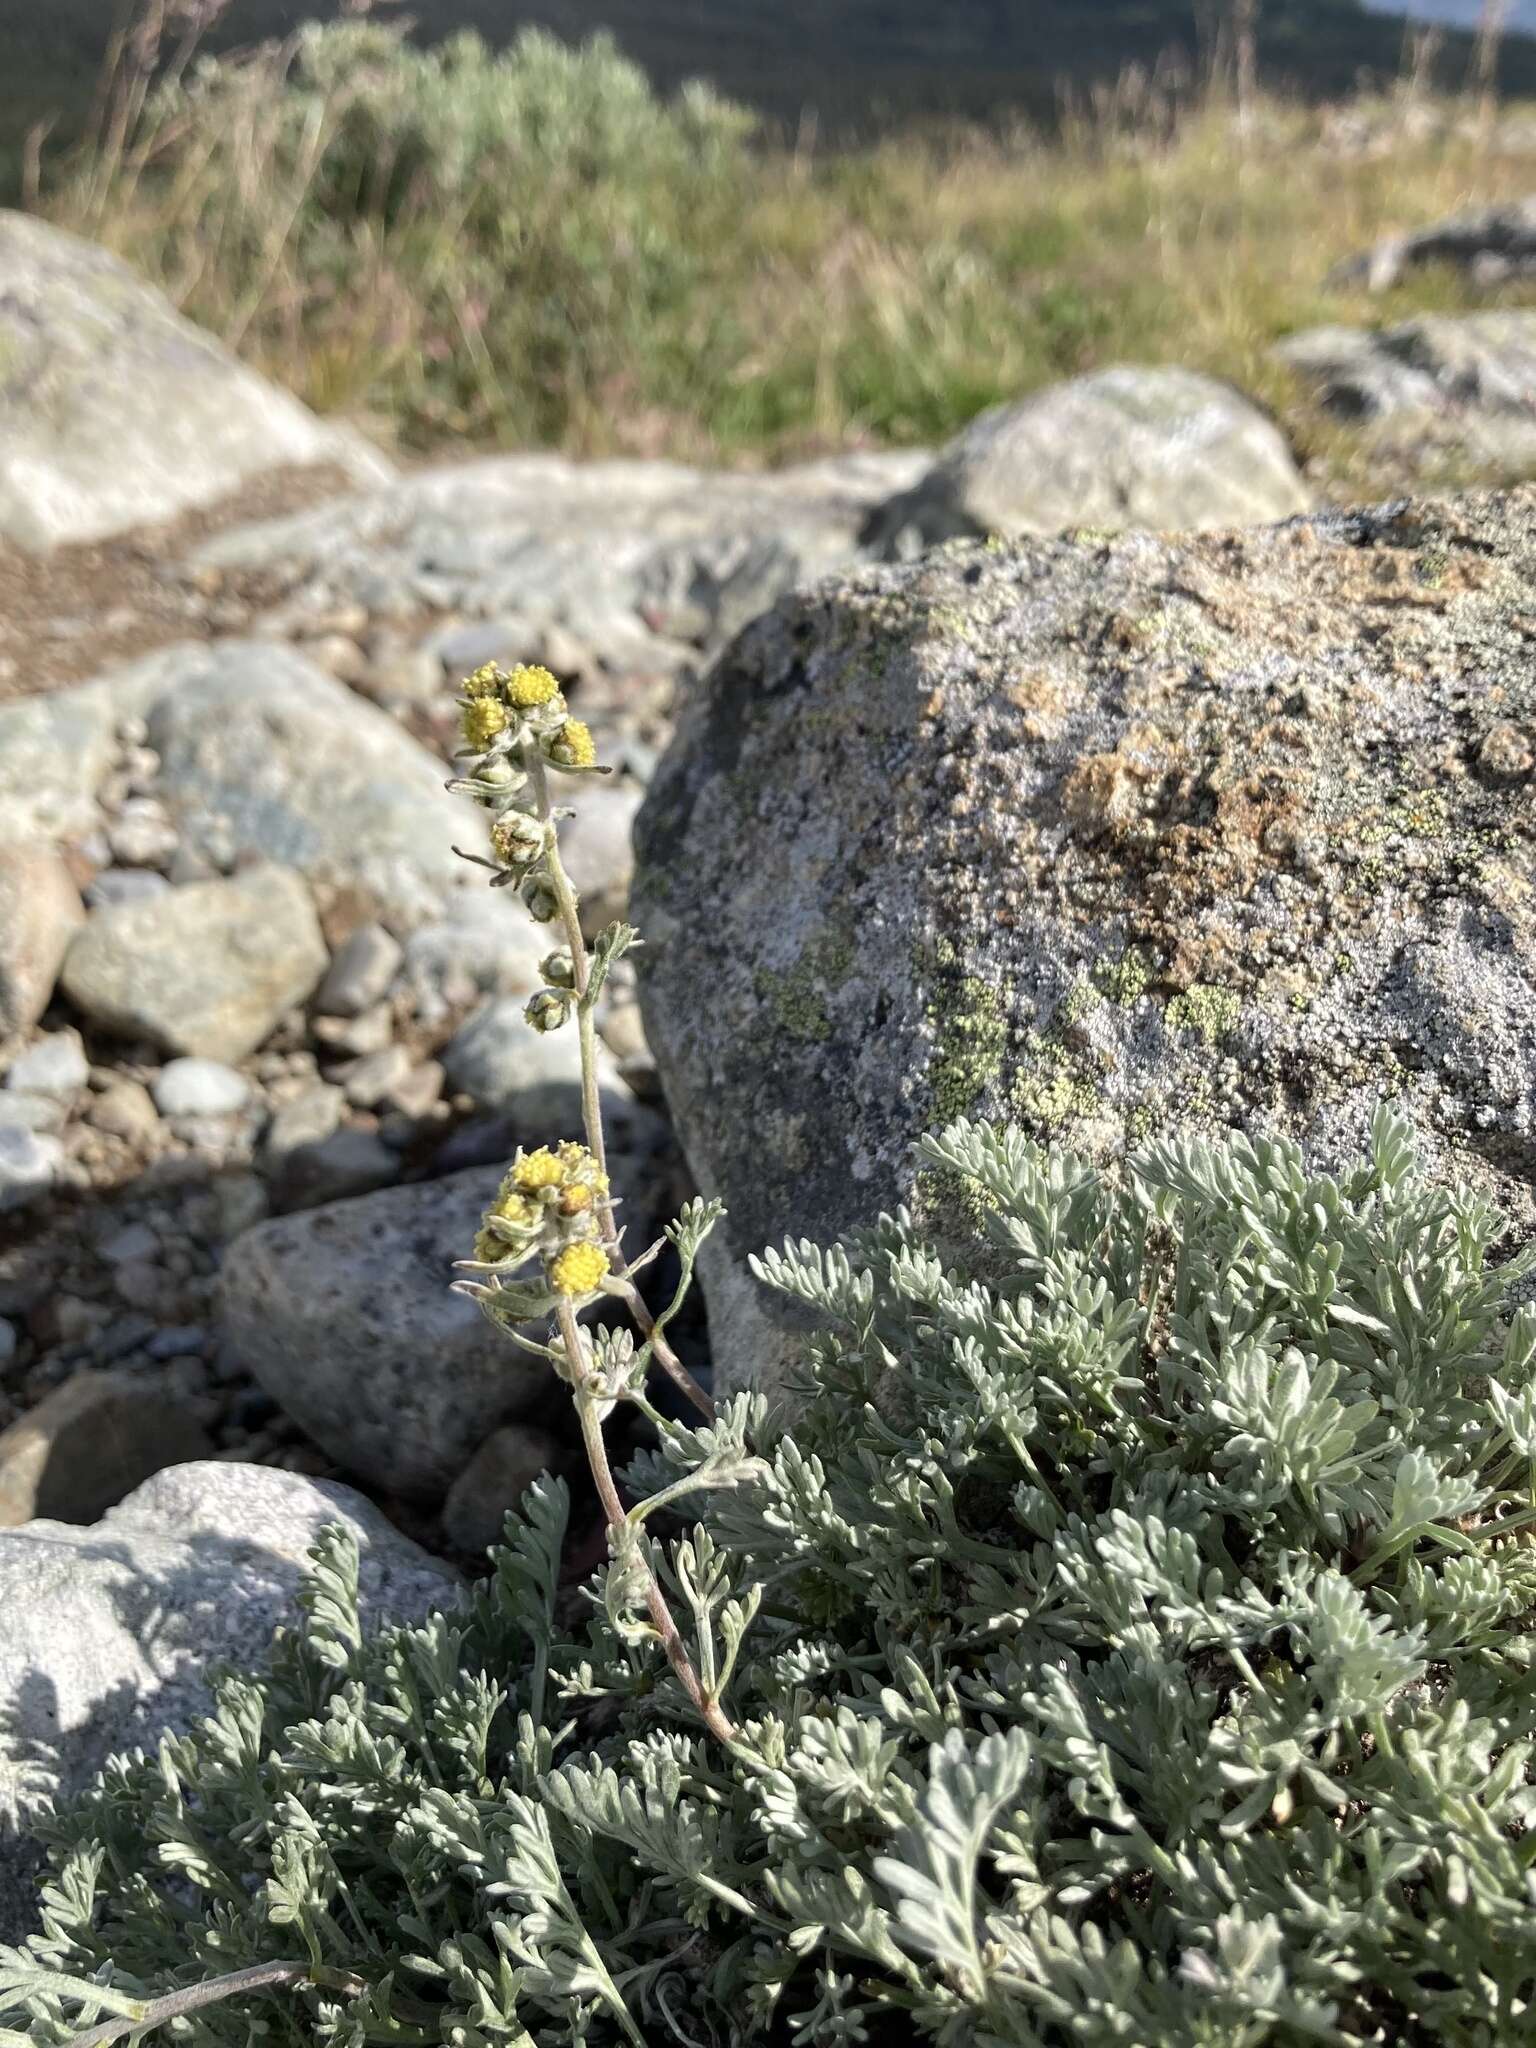 Image of forked wormwood